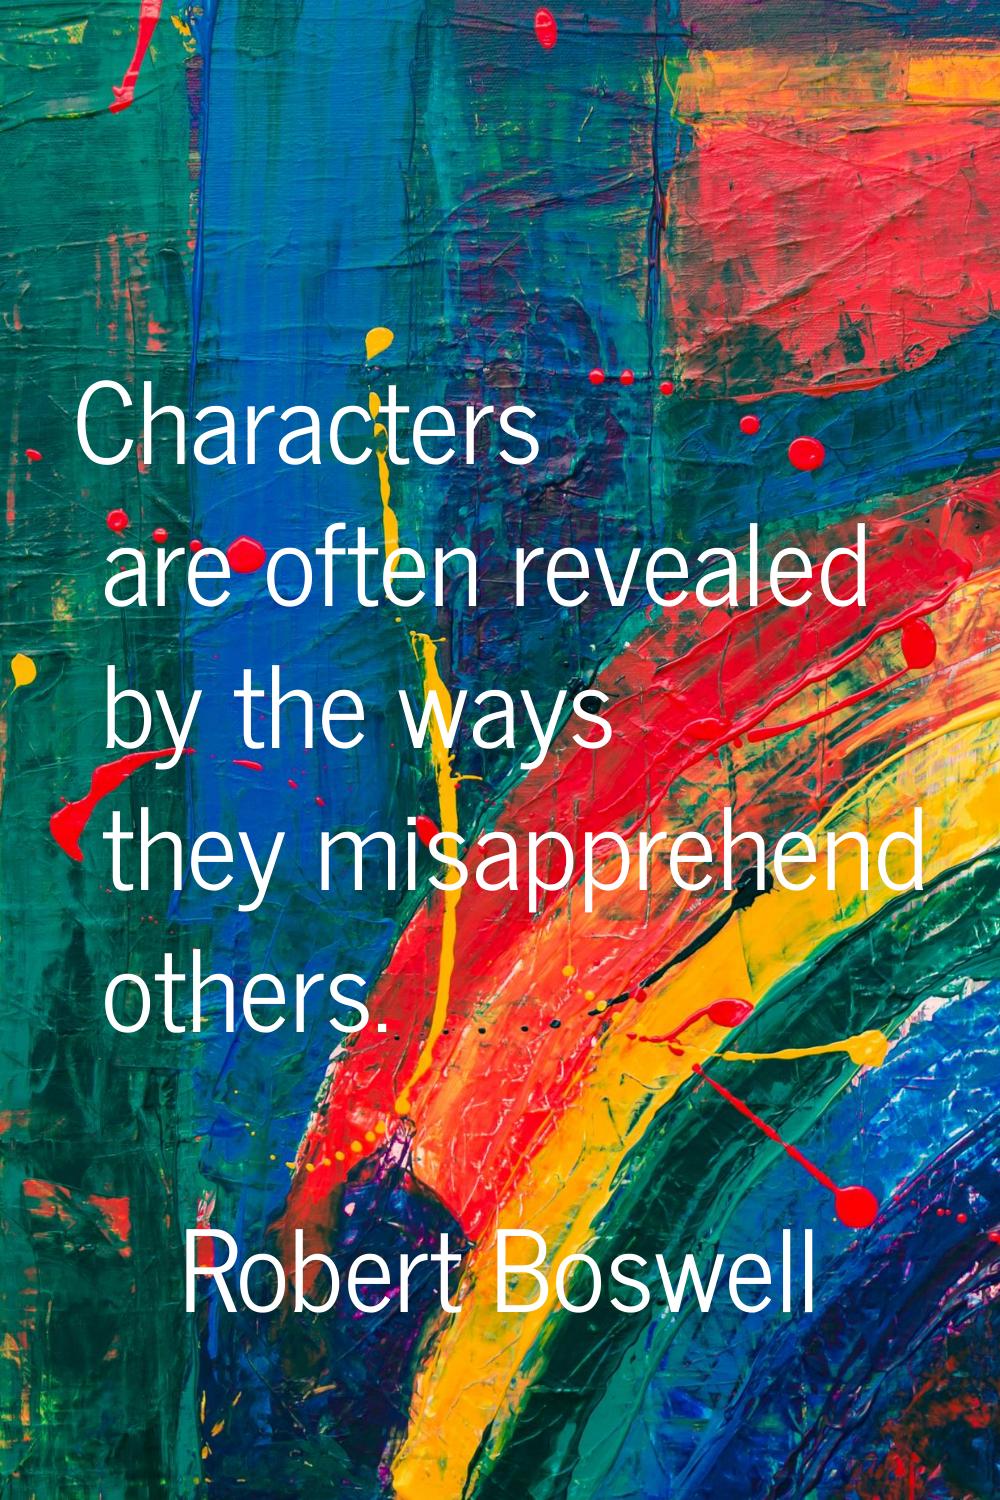 Characters are often revealed by the ways they misapprehend others.